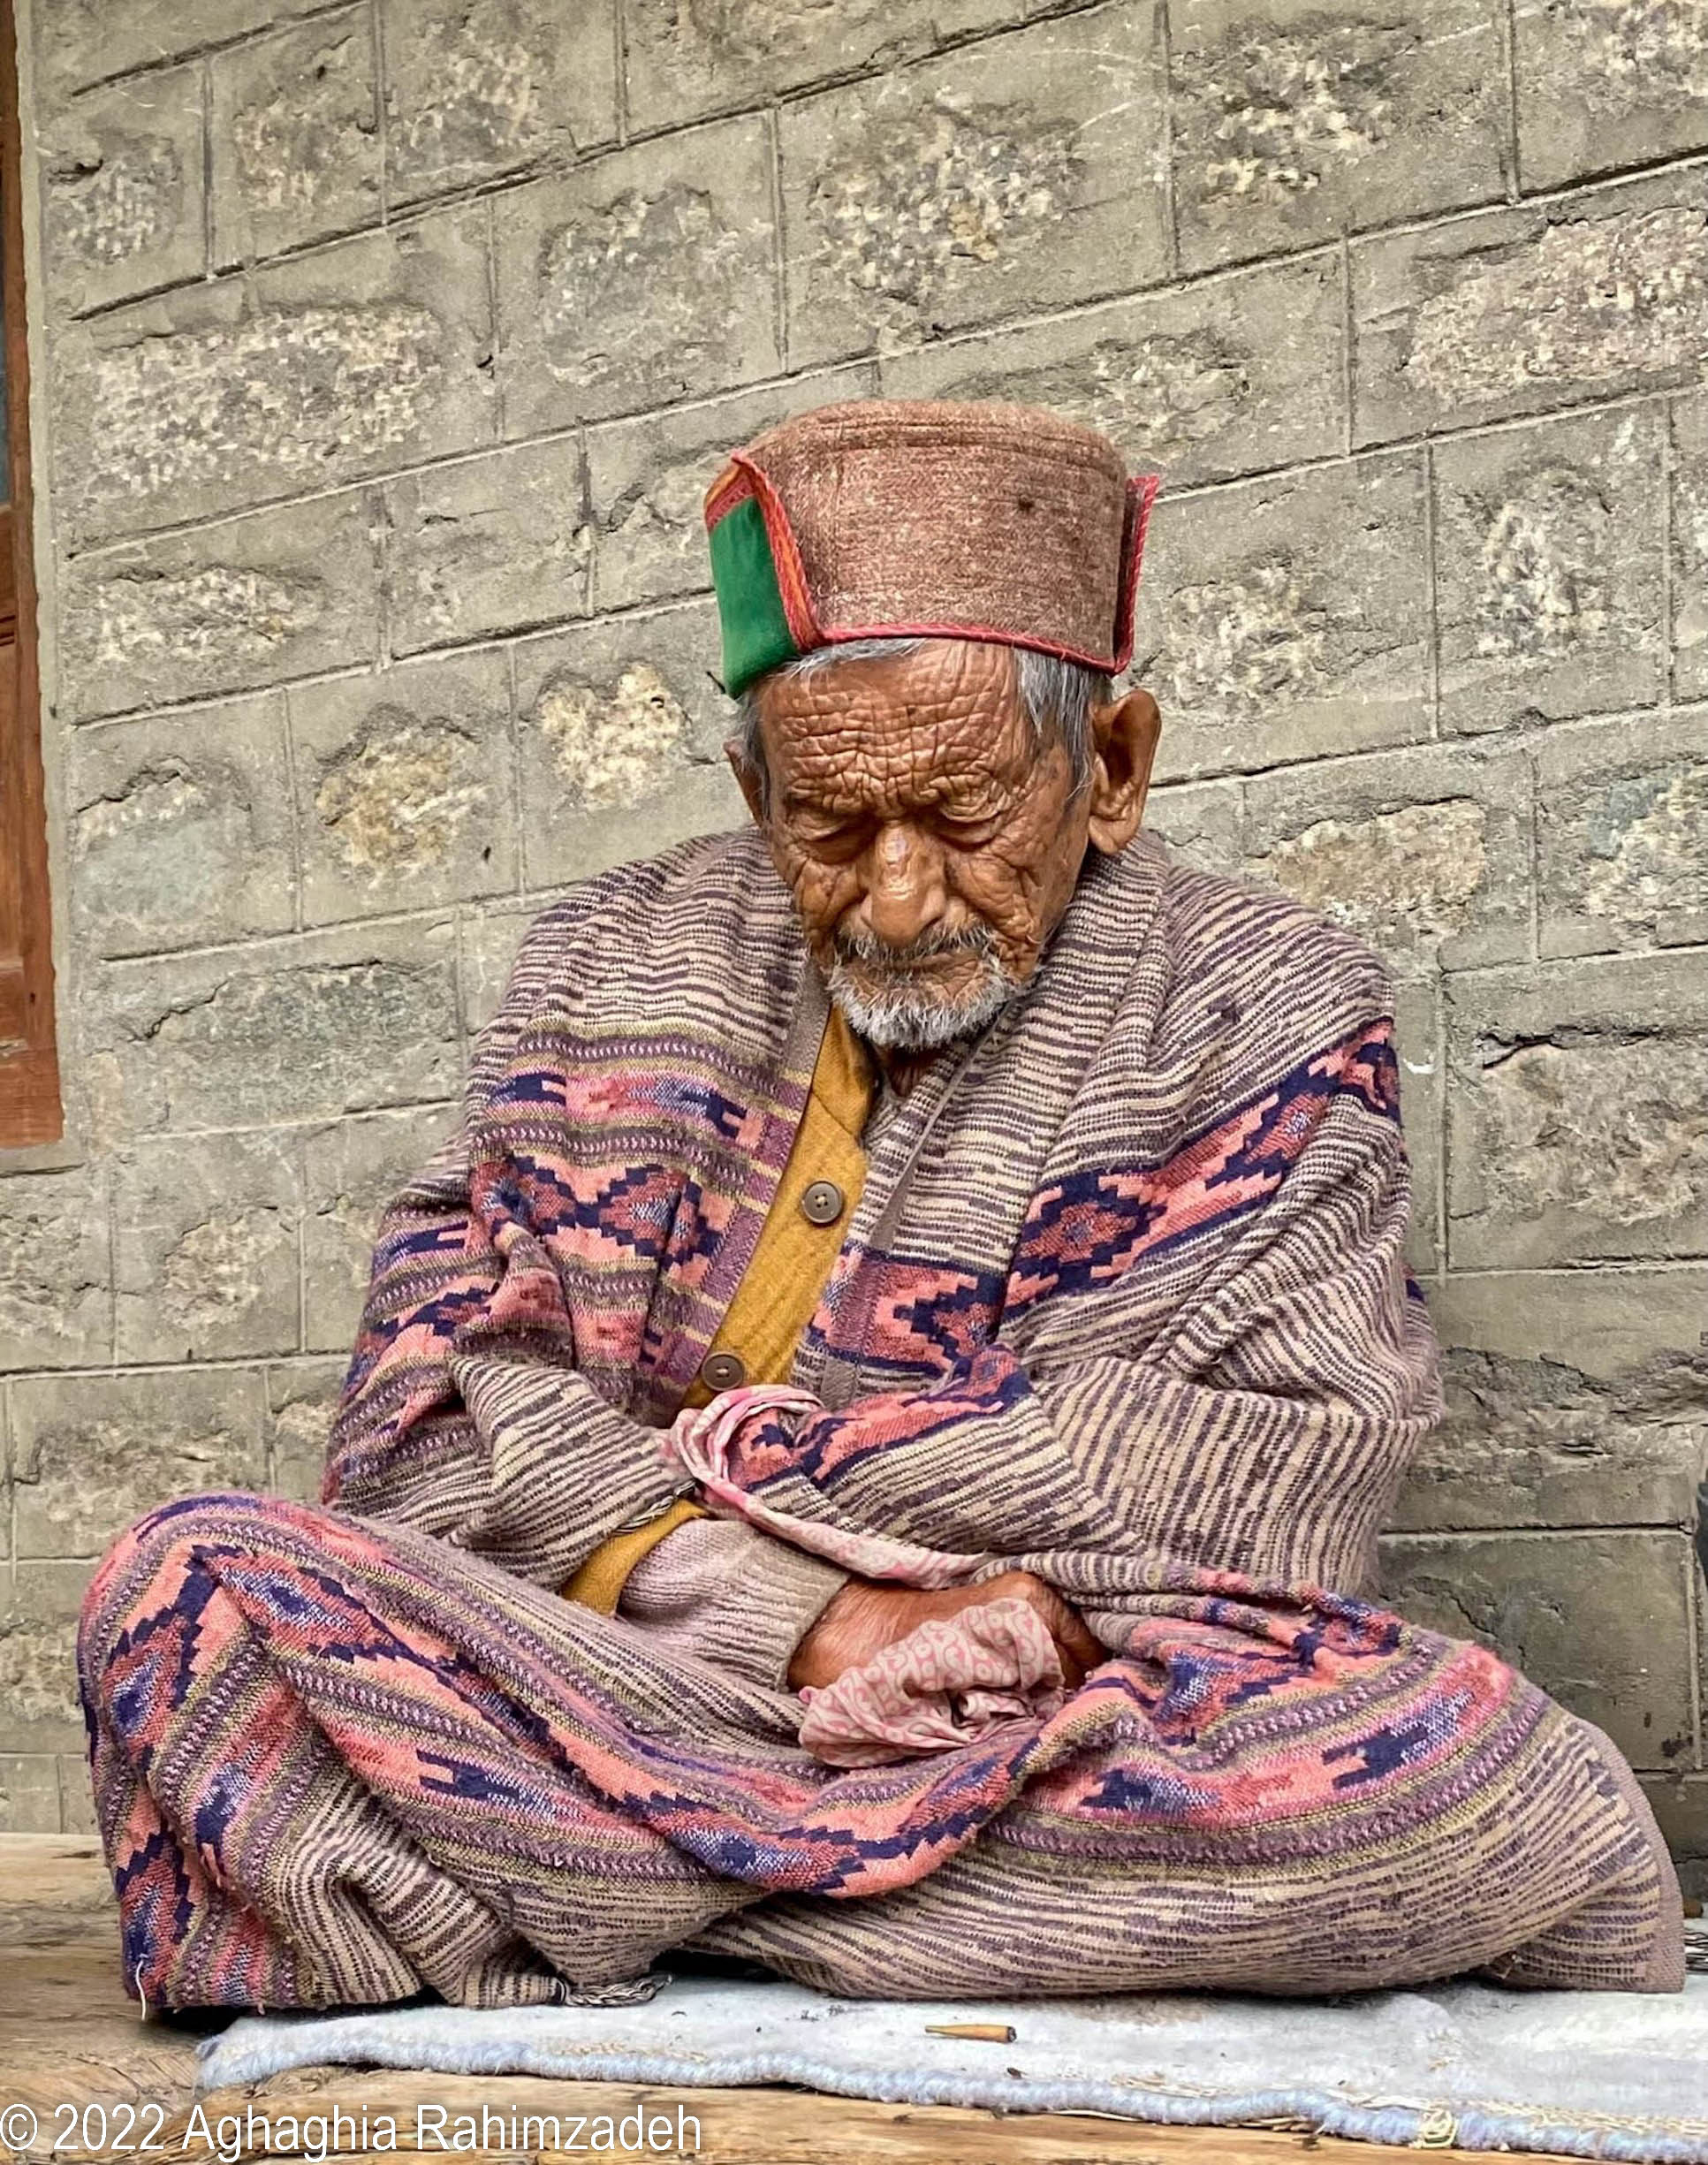 An elderly man sits cross-legged wearing a colorful woven robe and hat. 